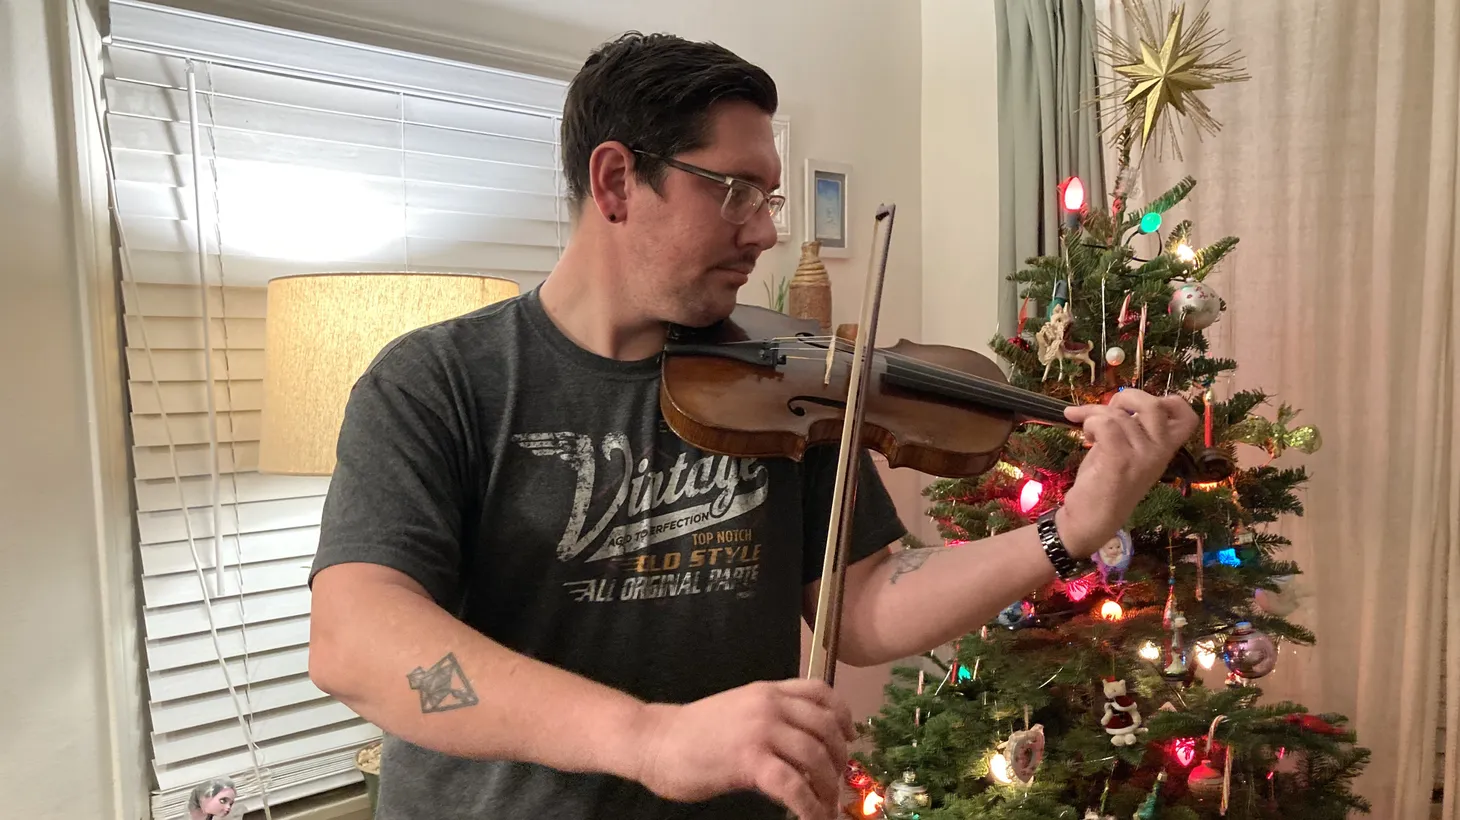 Elliott Orion plays his violin 10 years after an accident upended his life.